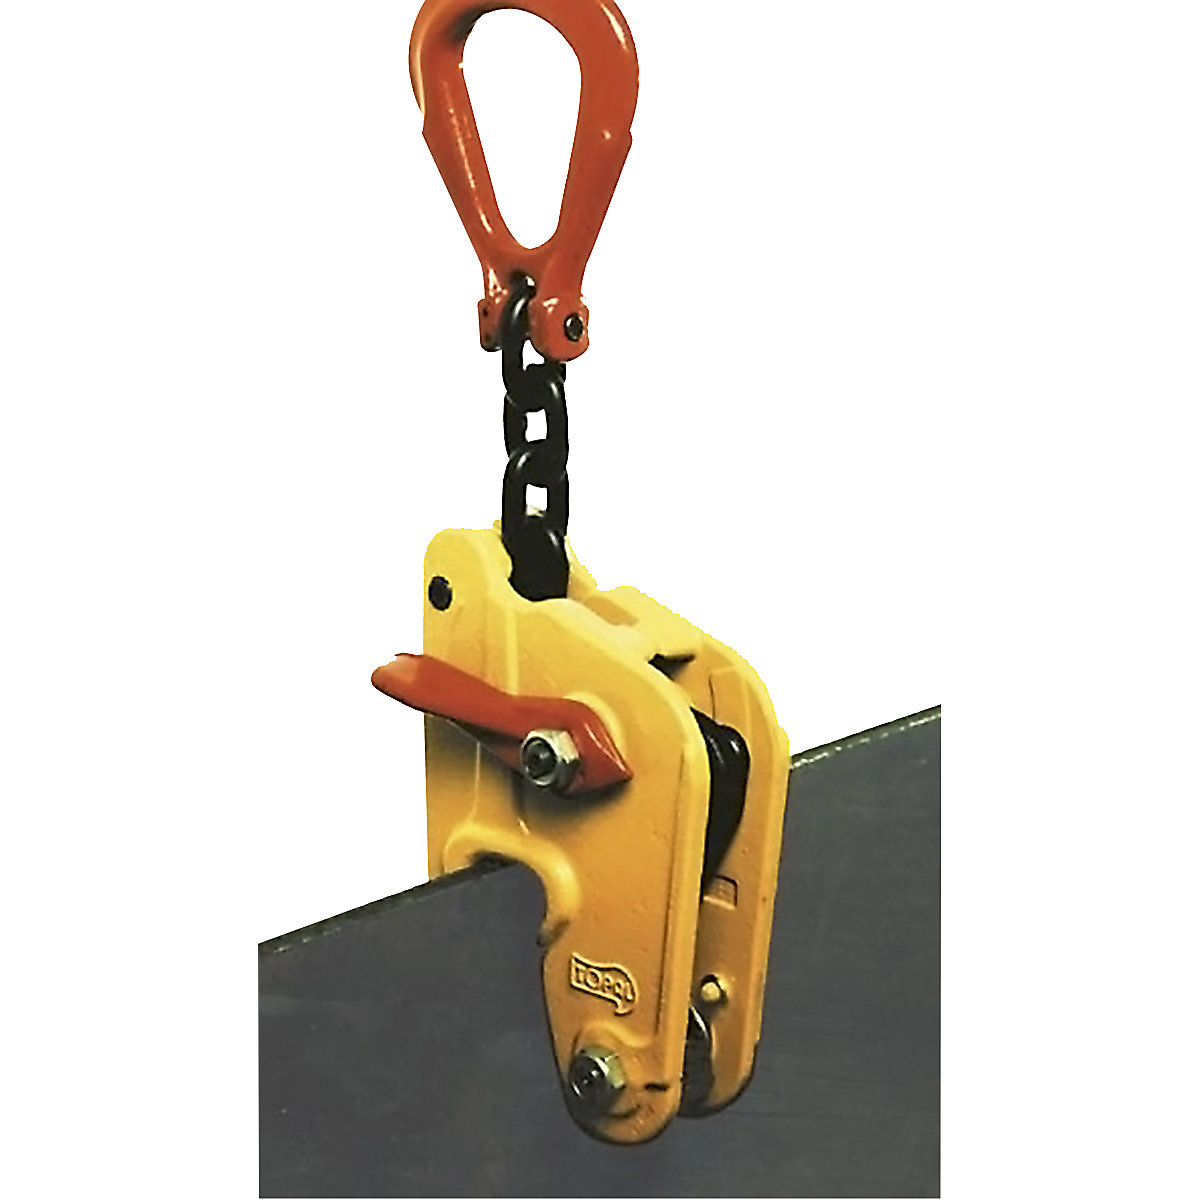 NK 5 plate clamp